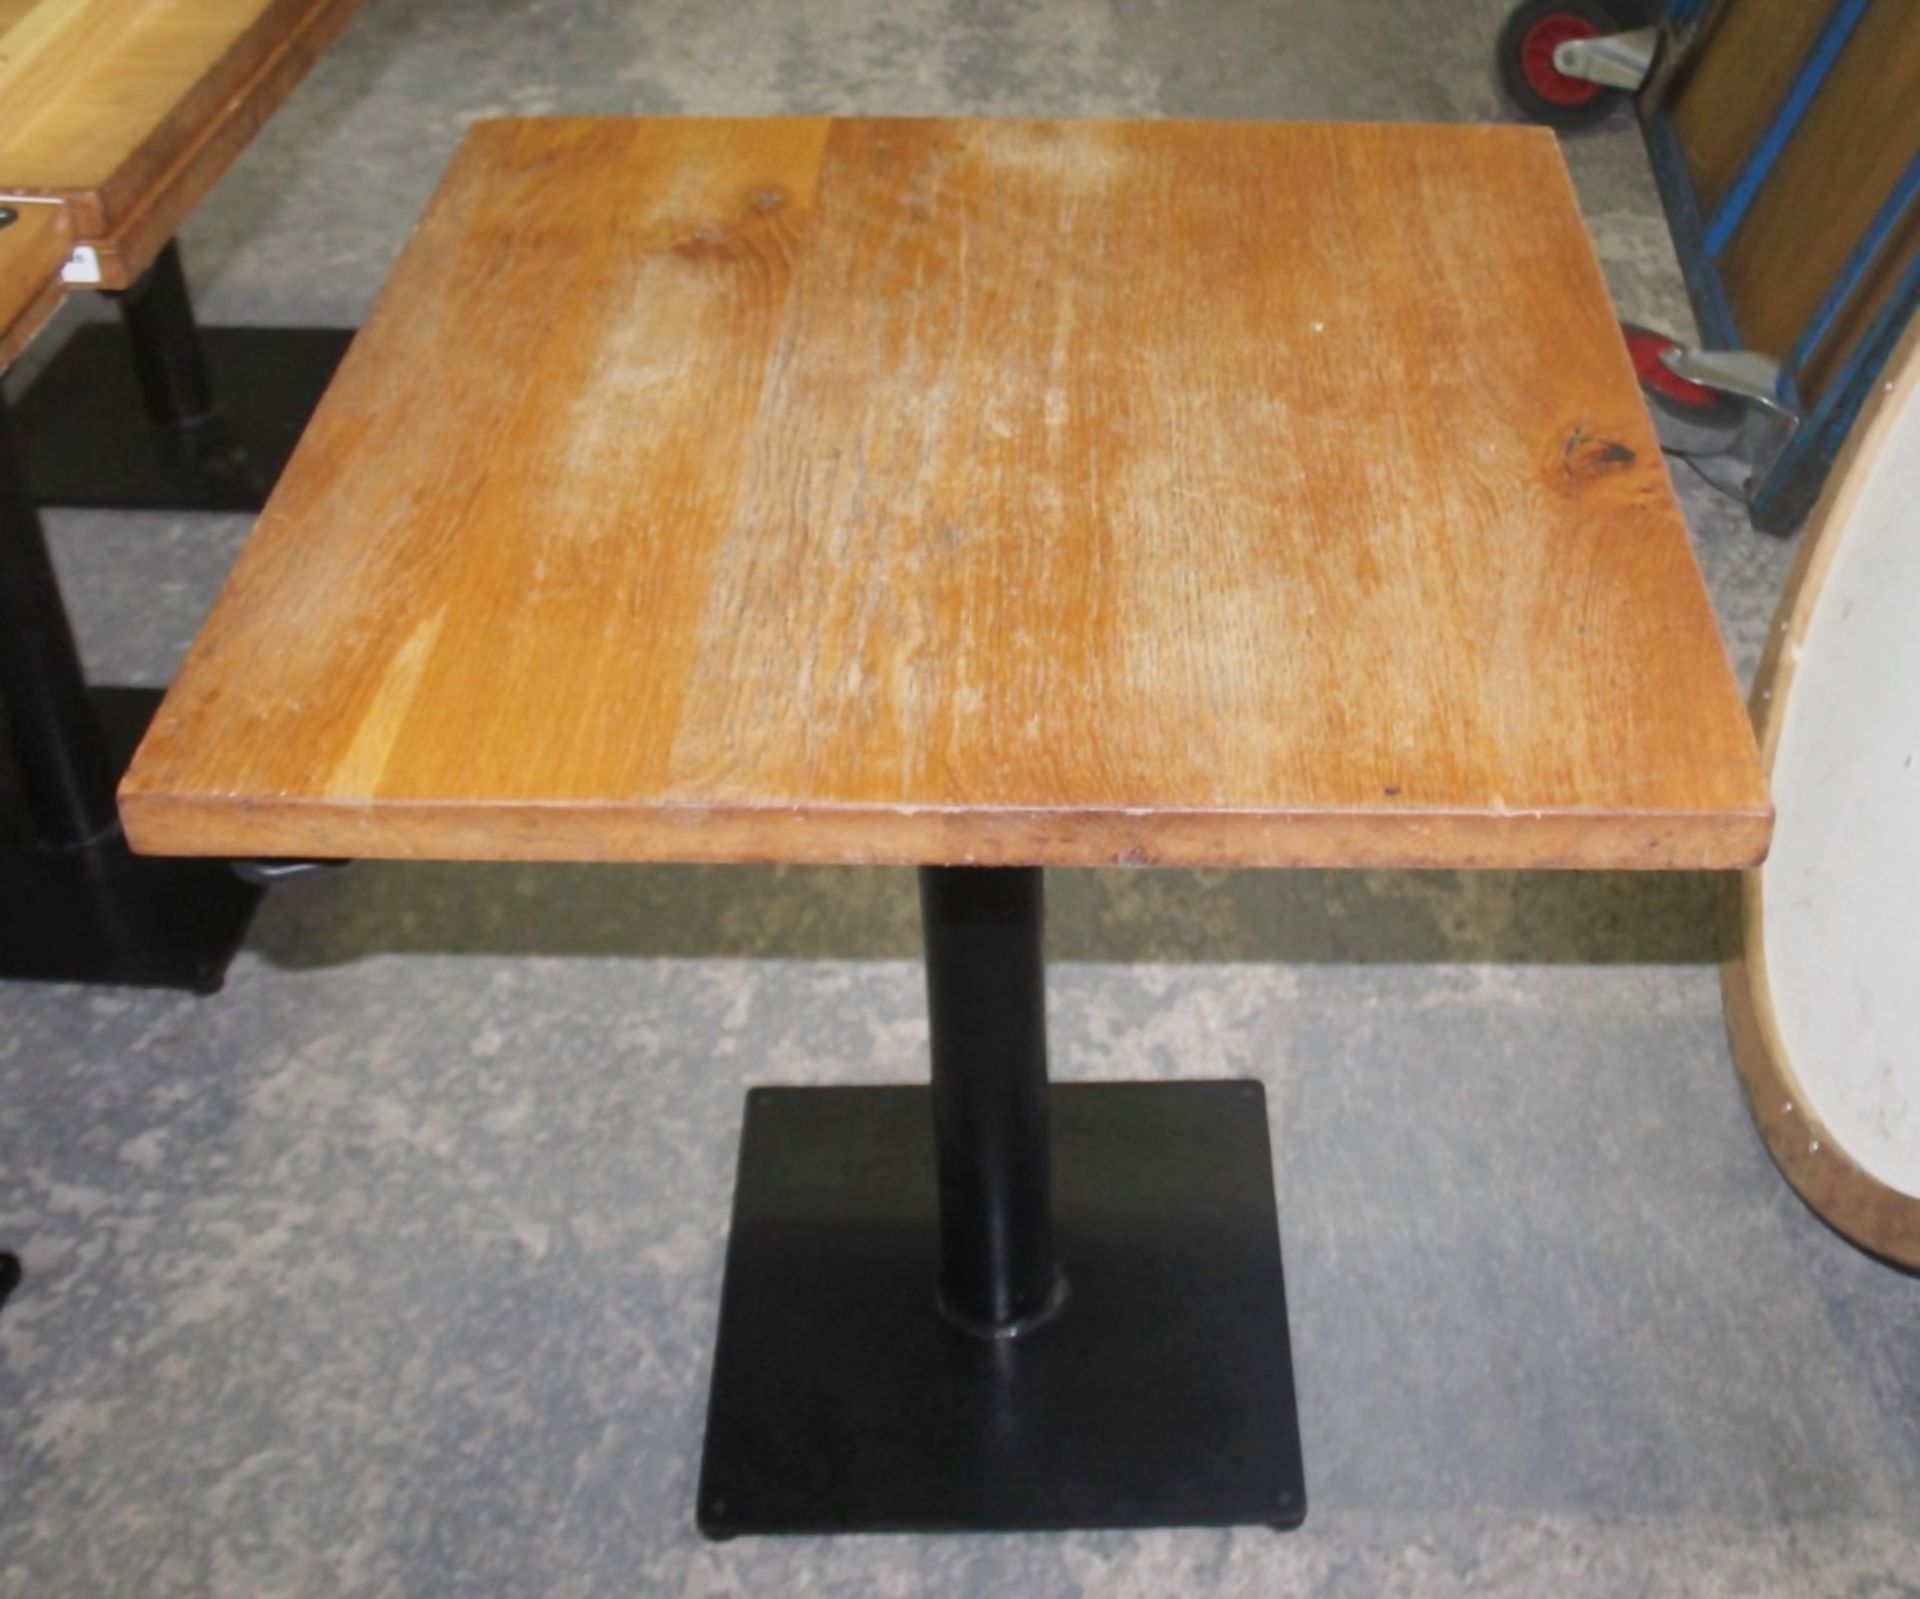 8 x Solid Oak Restaurant Dining Tables - Natural Rustic Knotty Oak Tops With Black Cast Iron Bases - - Image 5 of 8